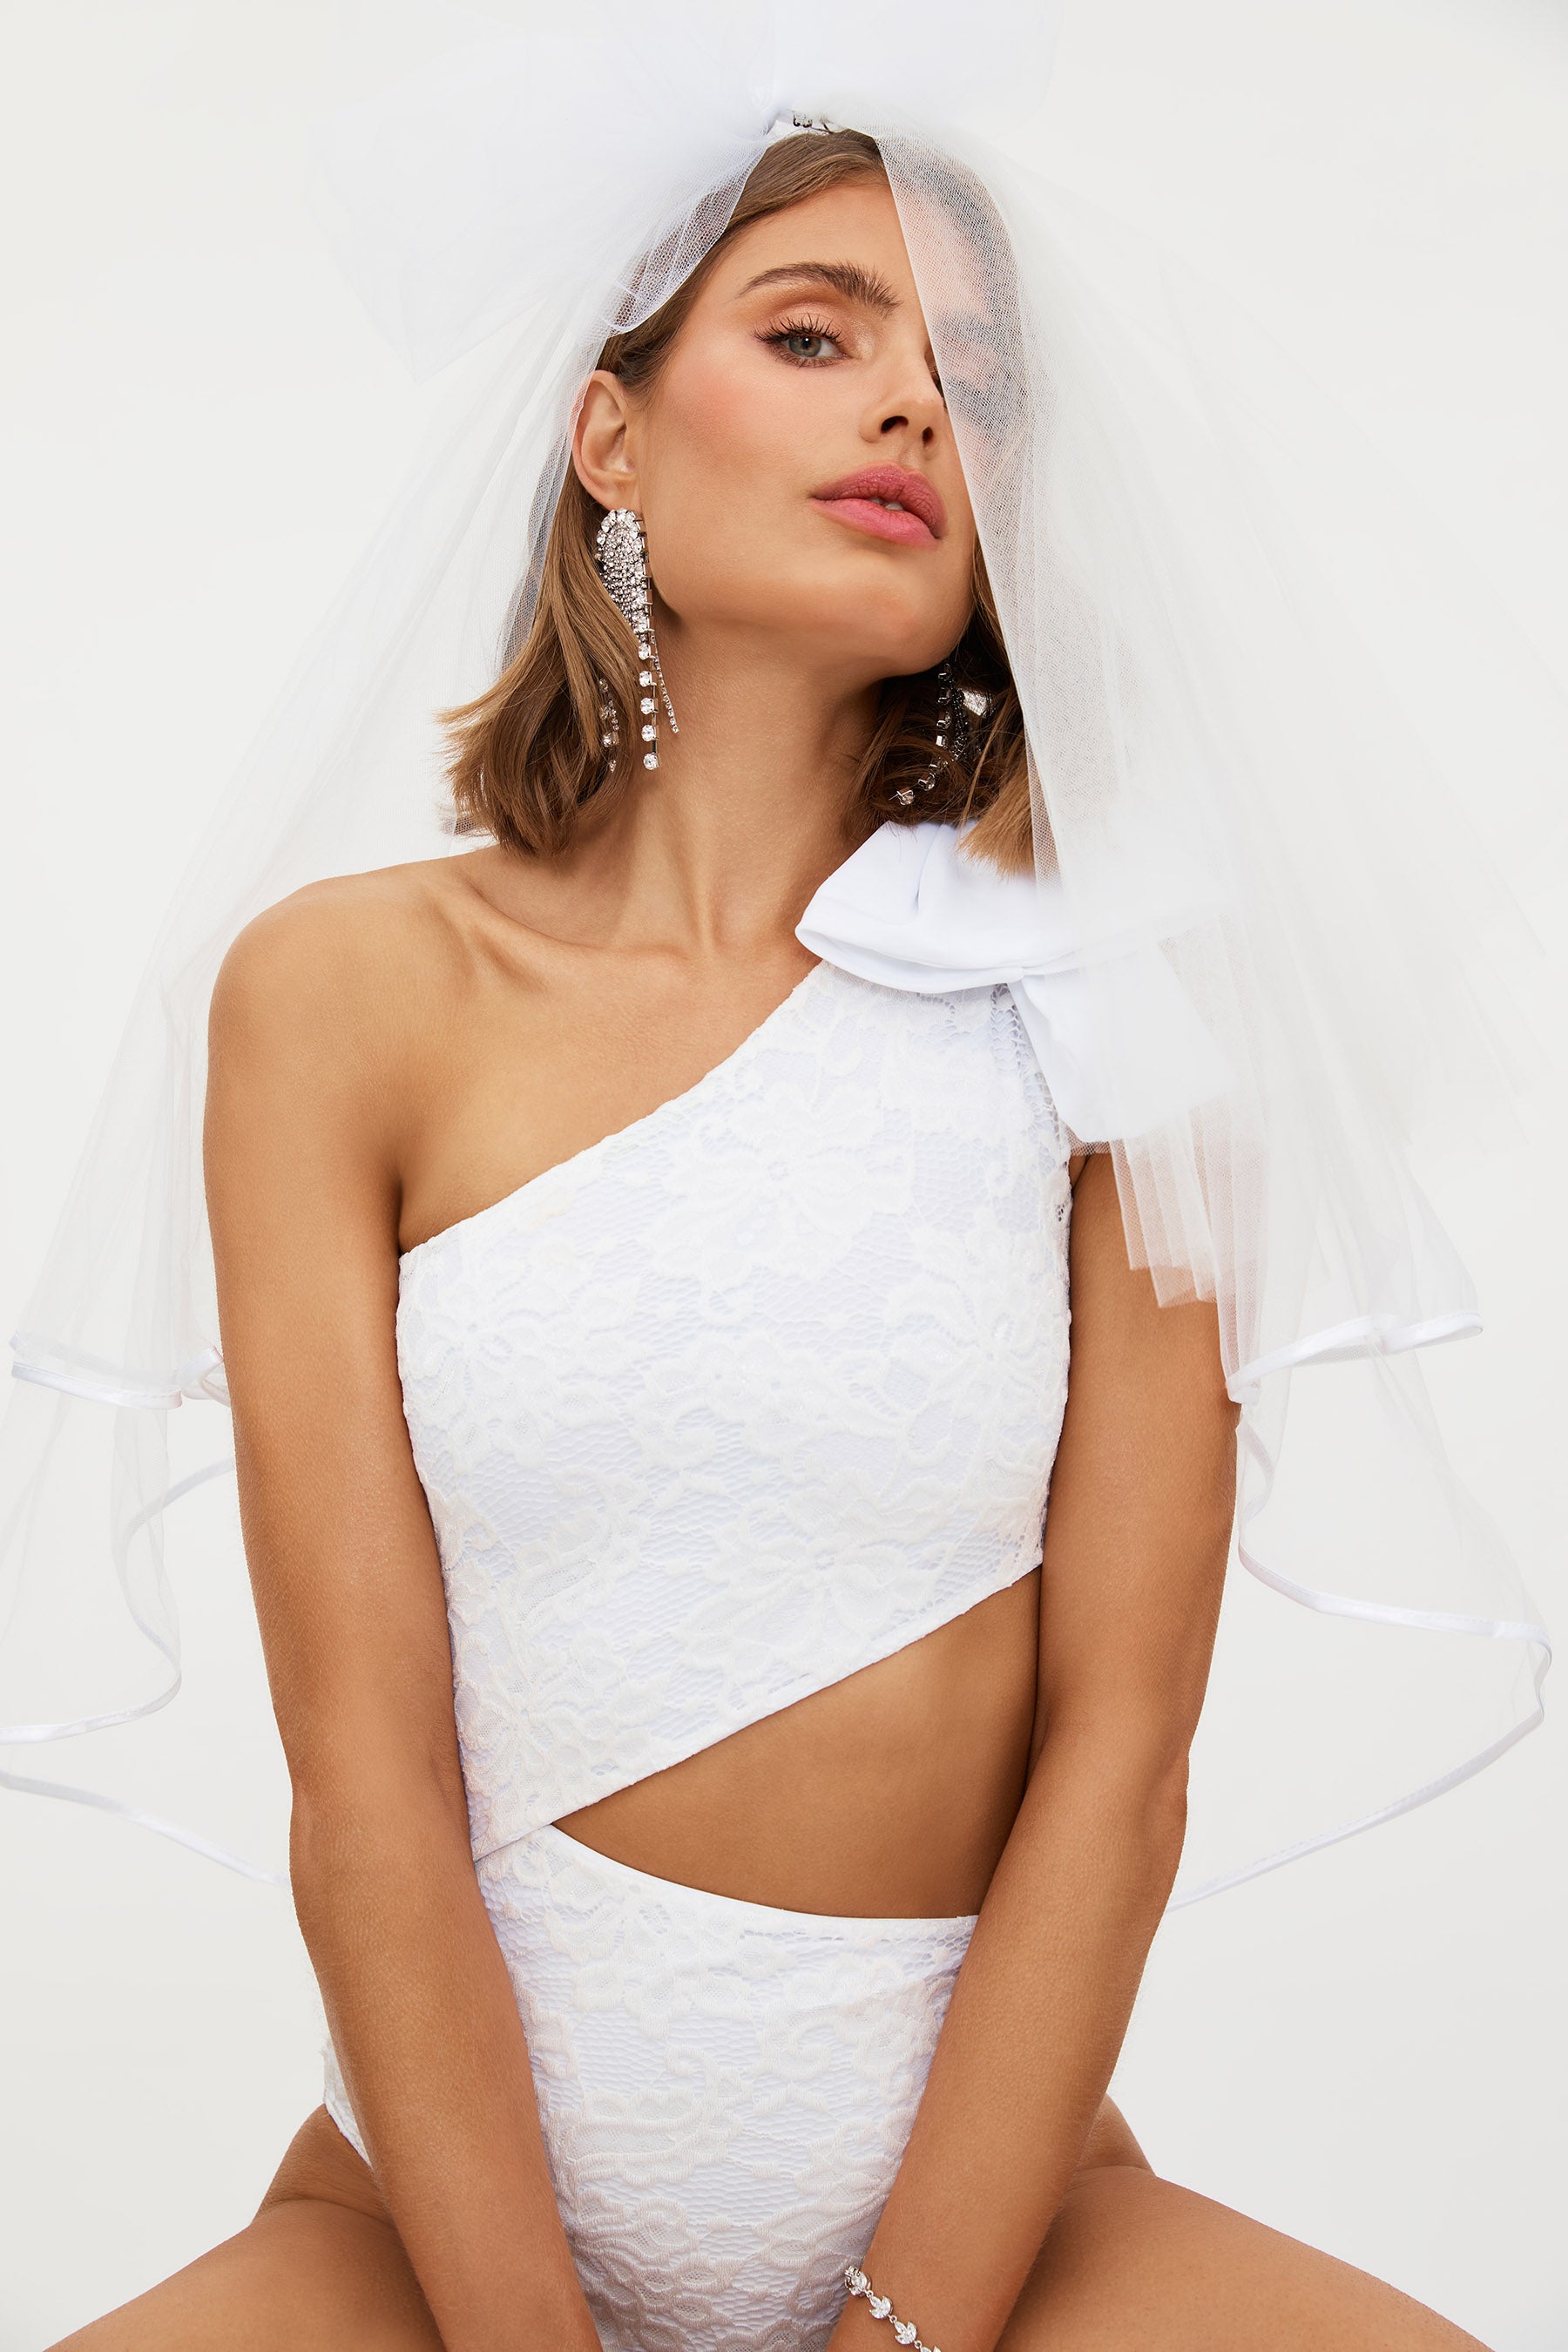 collection_runaway-bride collection_something-new